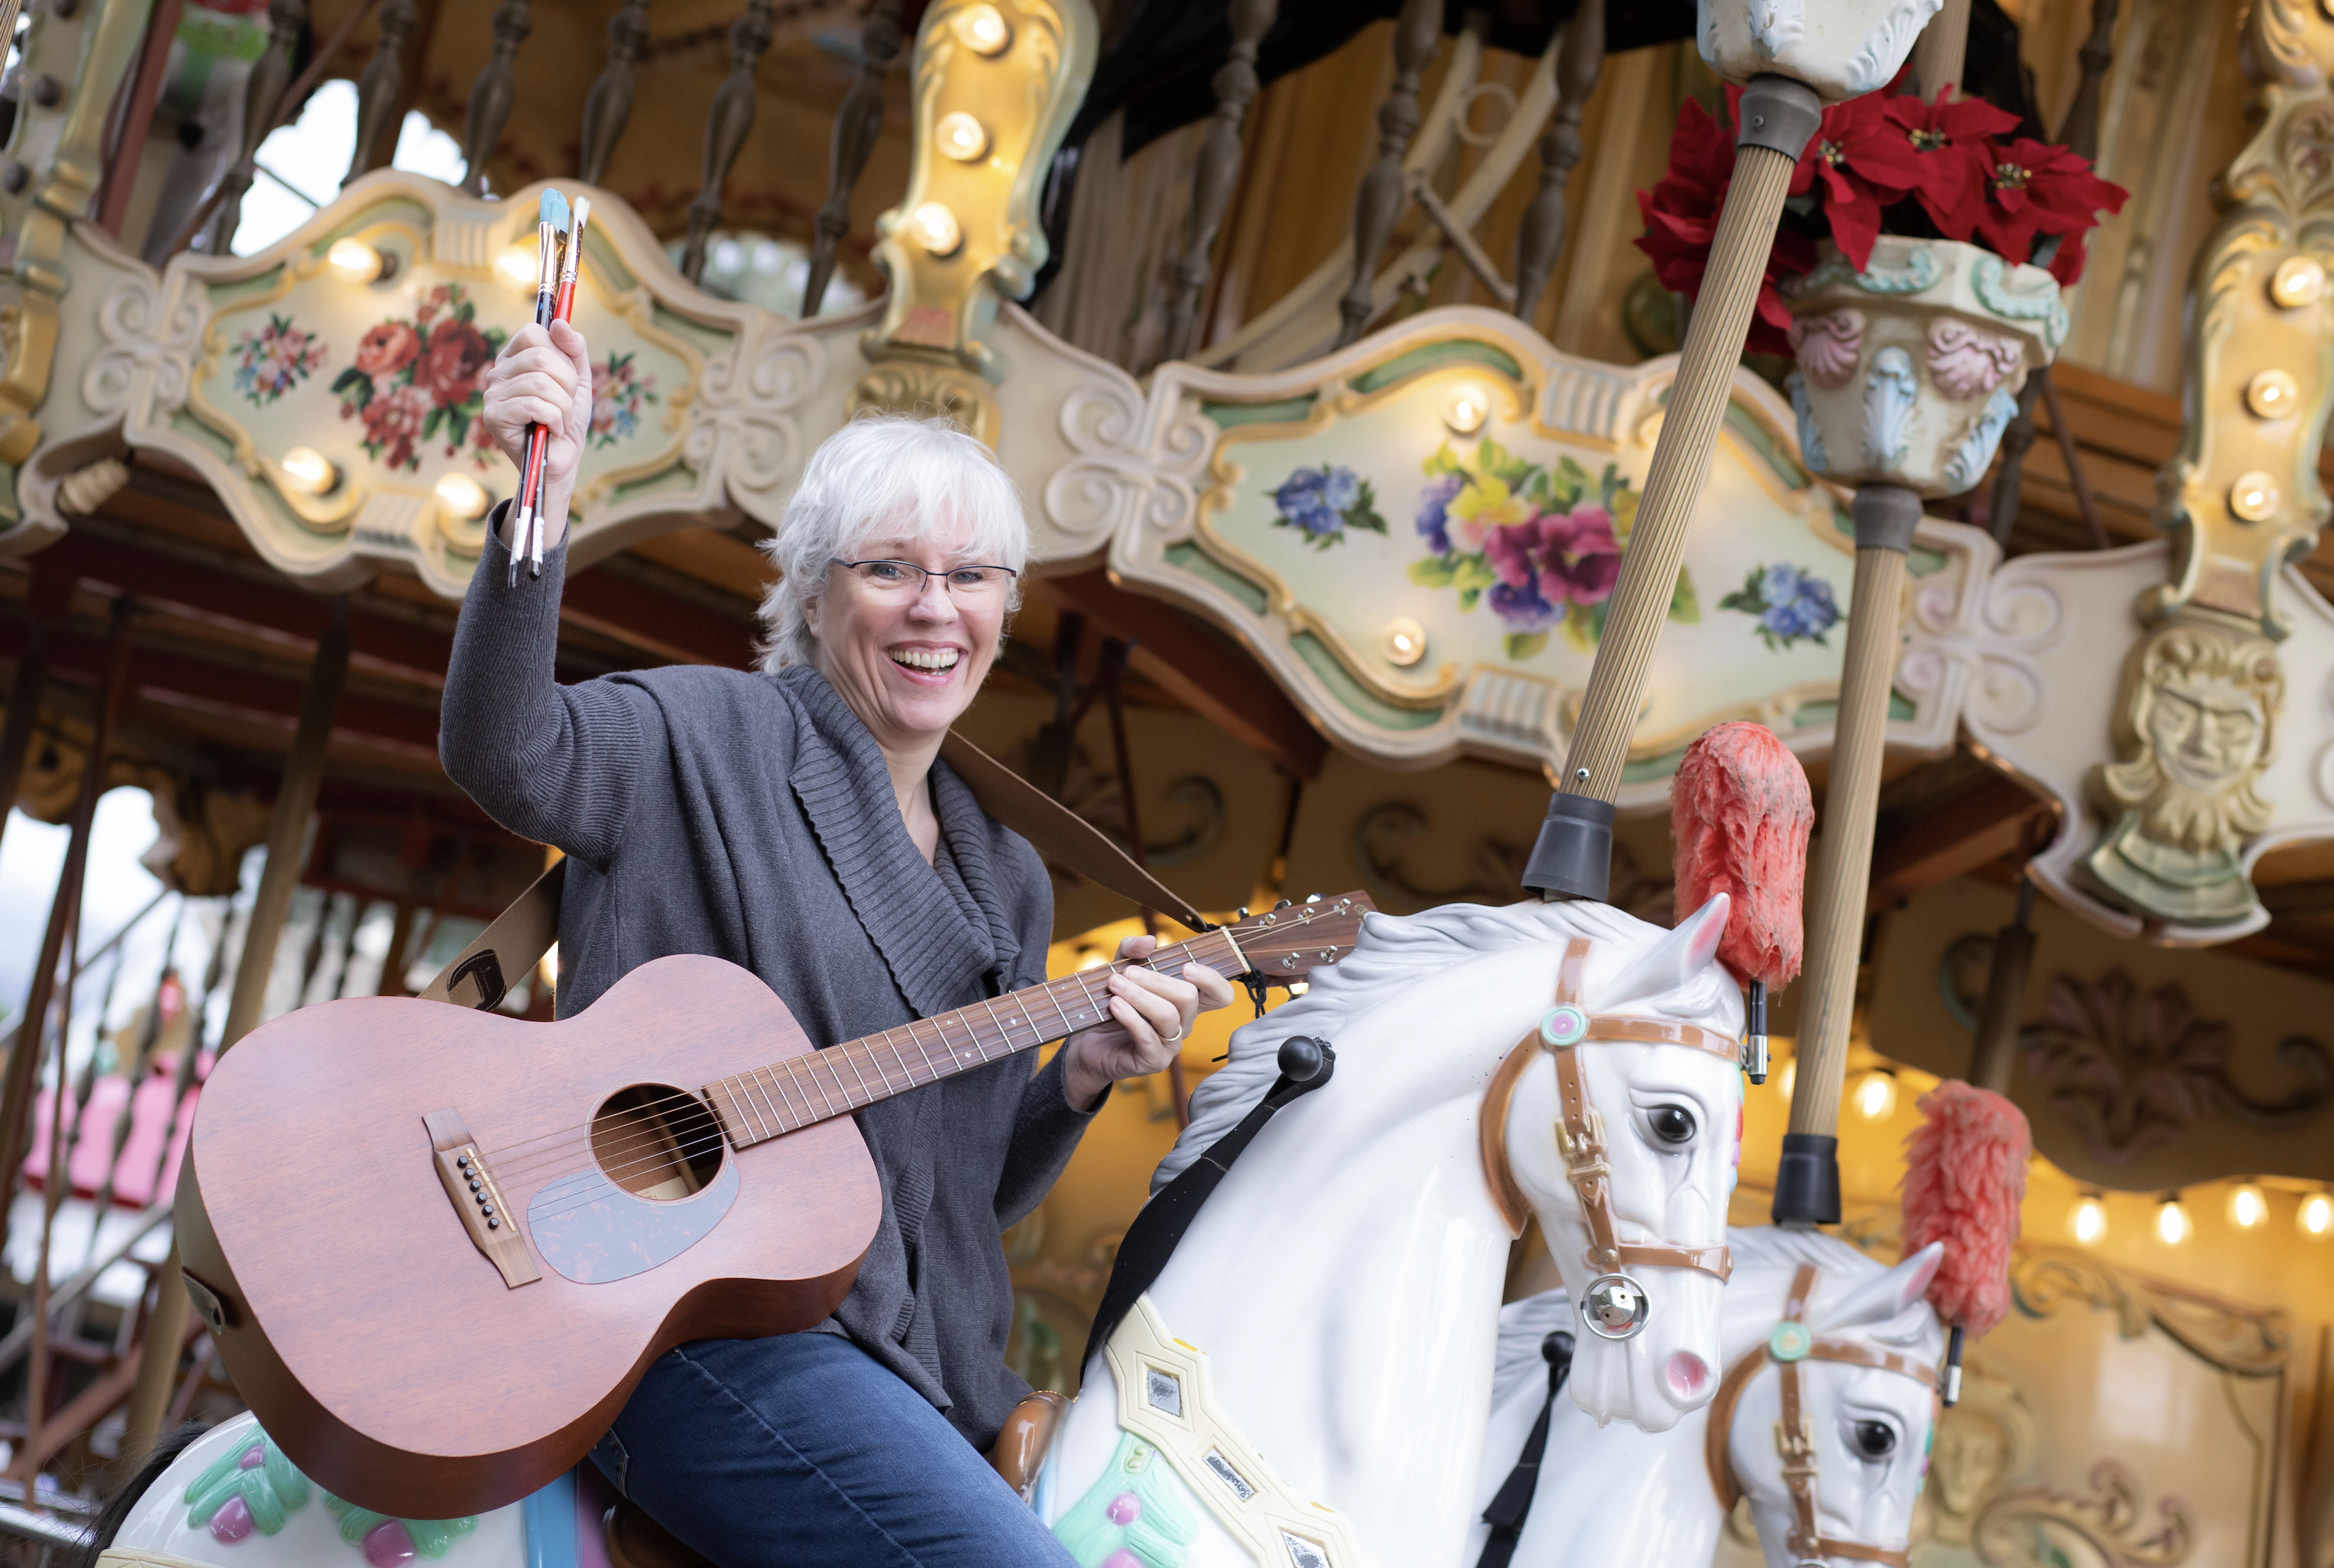 Woman with guitar and paint brushes seated on carousel horse